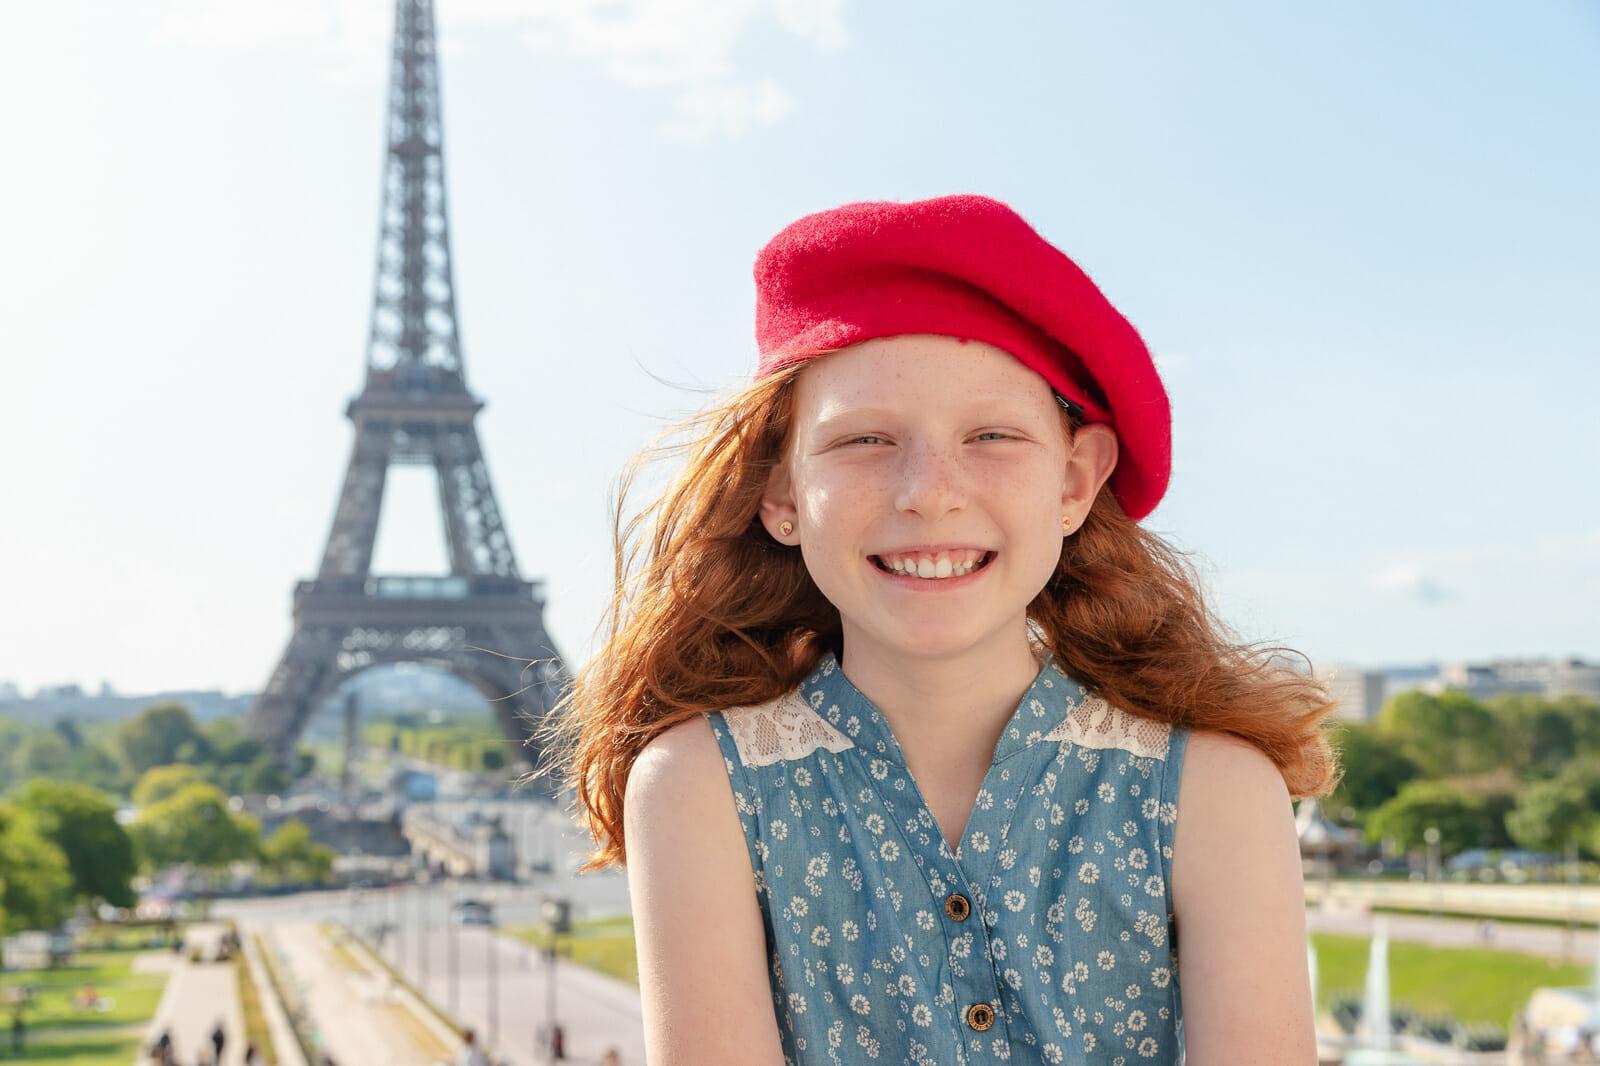 Stylish Paris family and kids portraits at Trocadero Eiffel Tower with red beret as prop